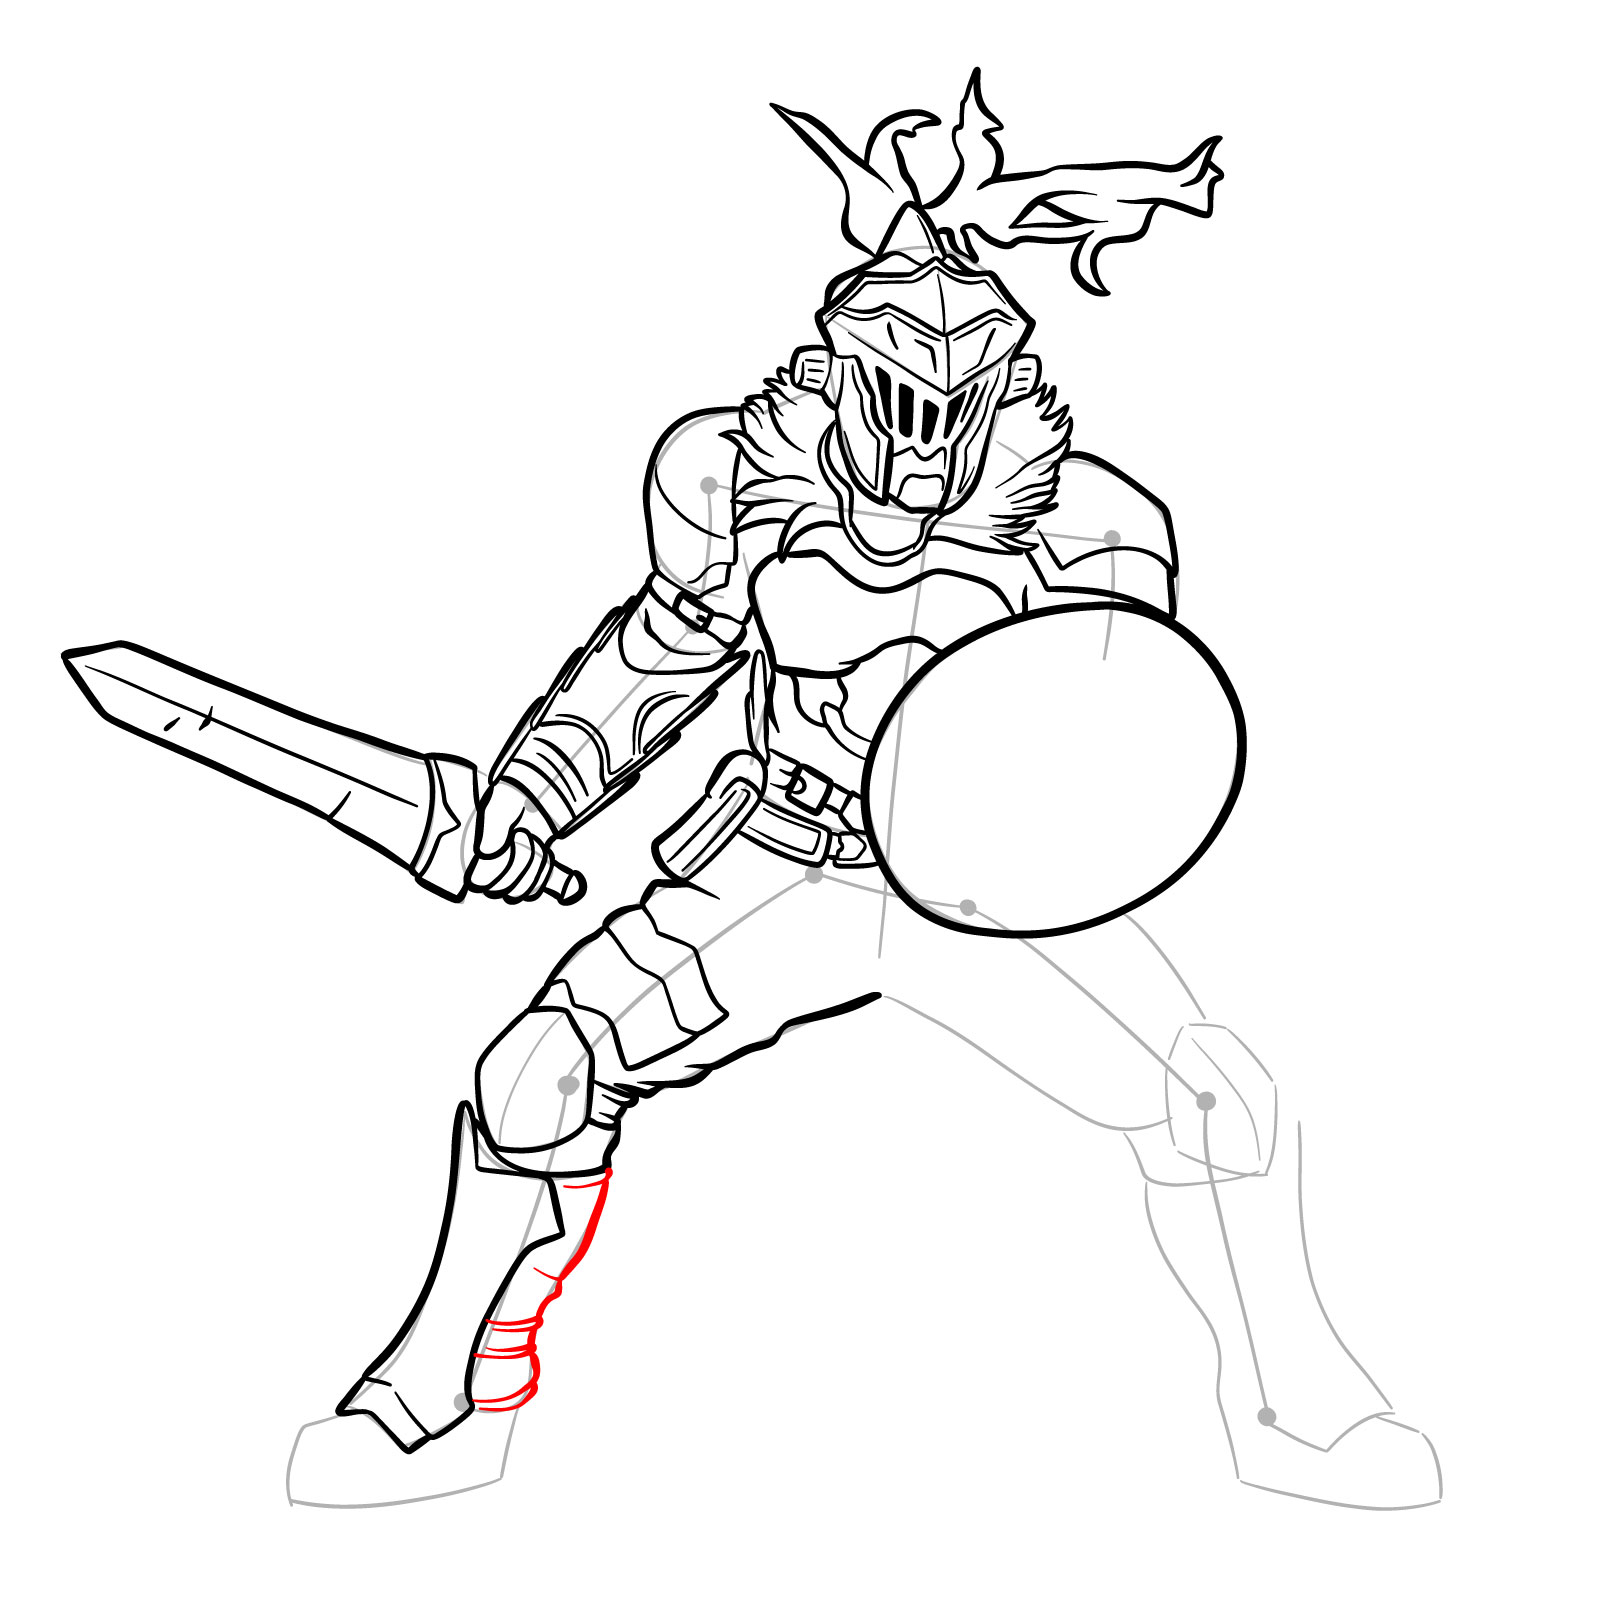 How to Draw Goblin Slayer in battle stance - step 30